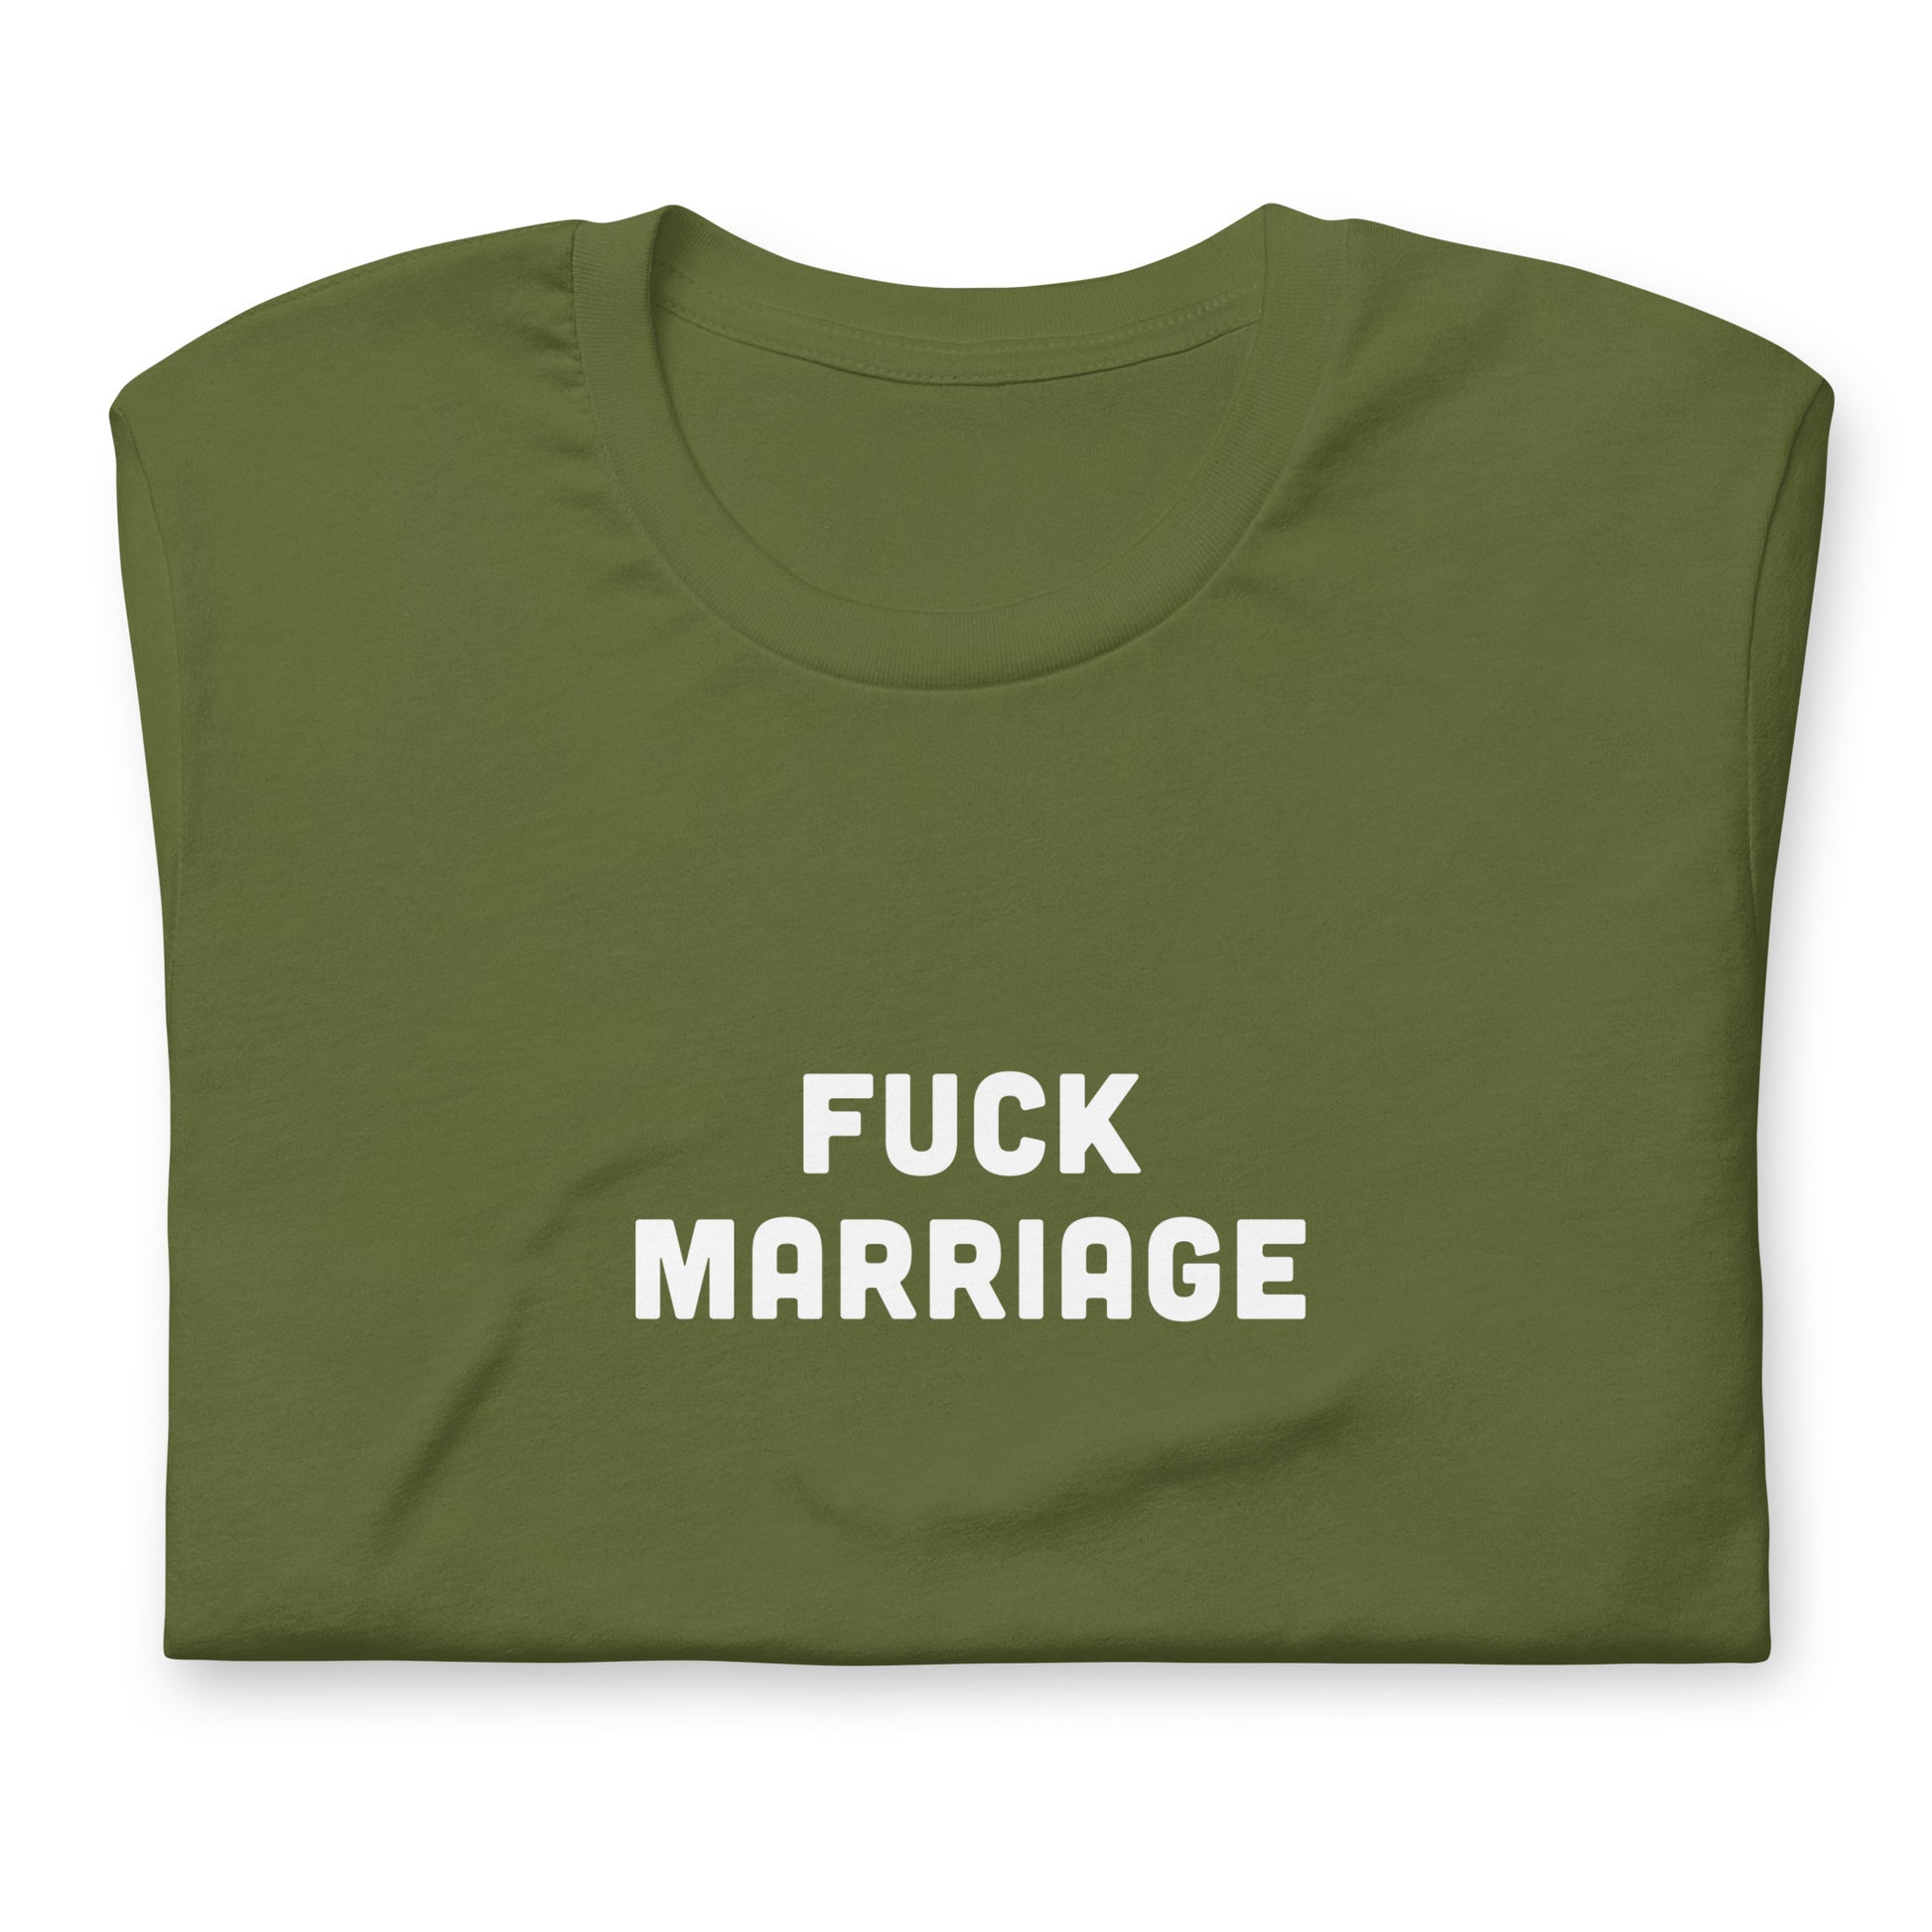 Fuck Marriage T-Shirt Size S Color Navy